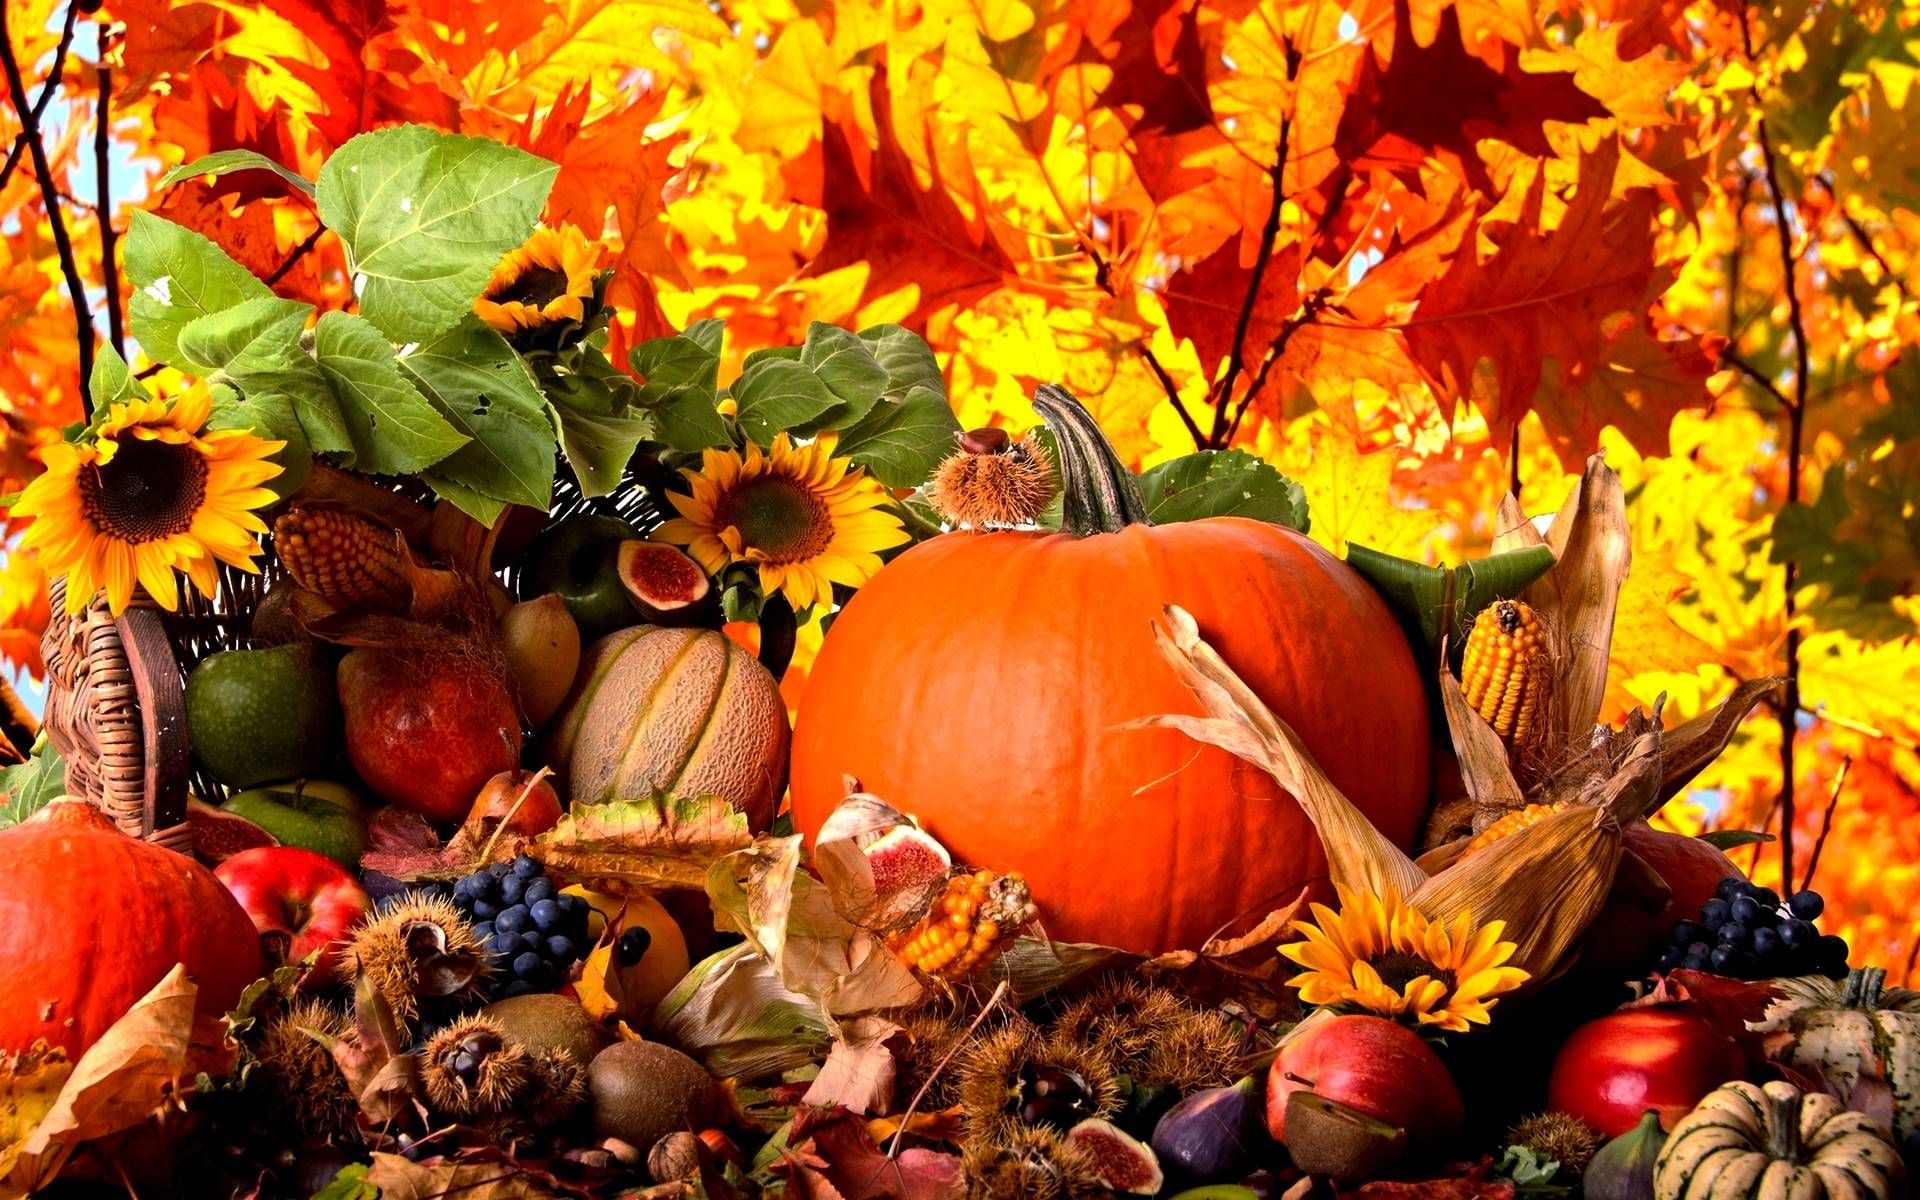 1920x1200 Download Fall Harvest Wallpaper High Quality for iphone, pc desktop,  android, or mac. iphone, nature, red.